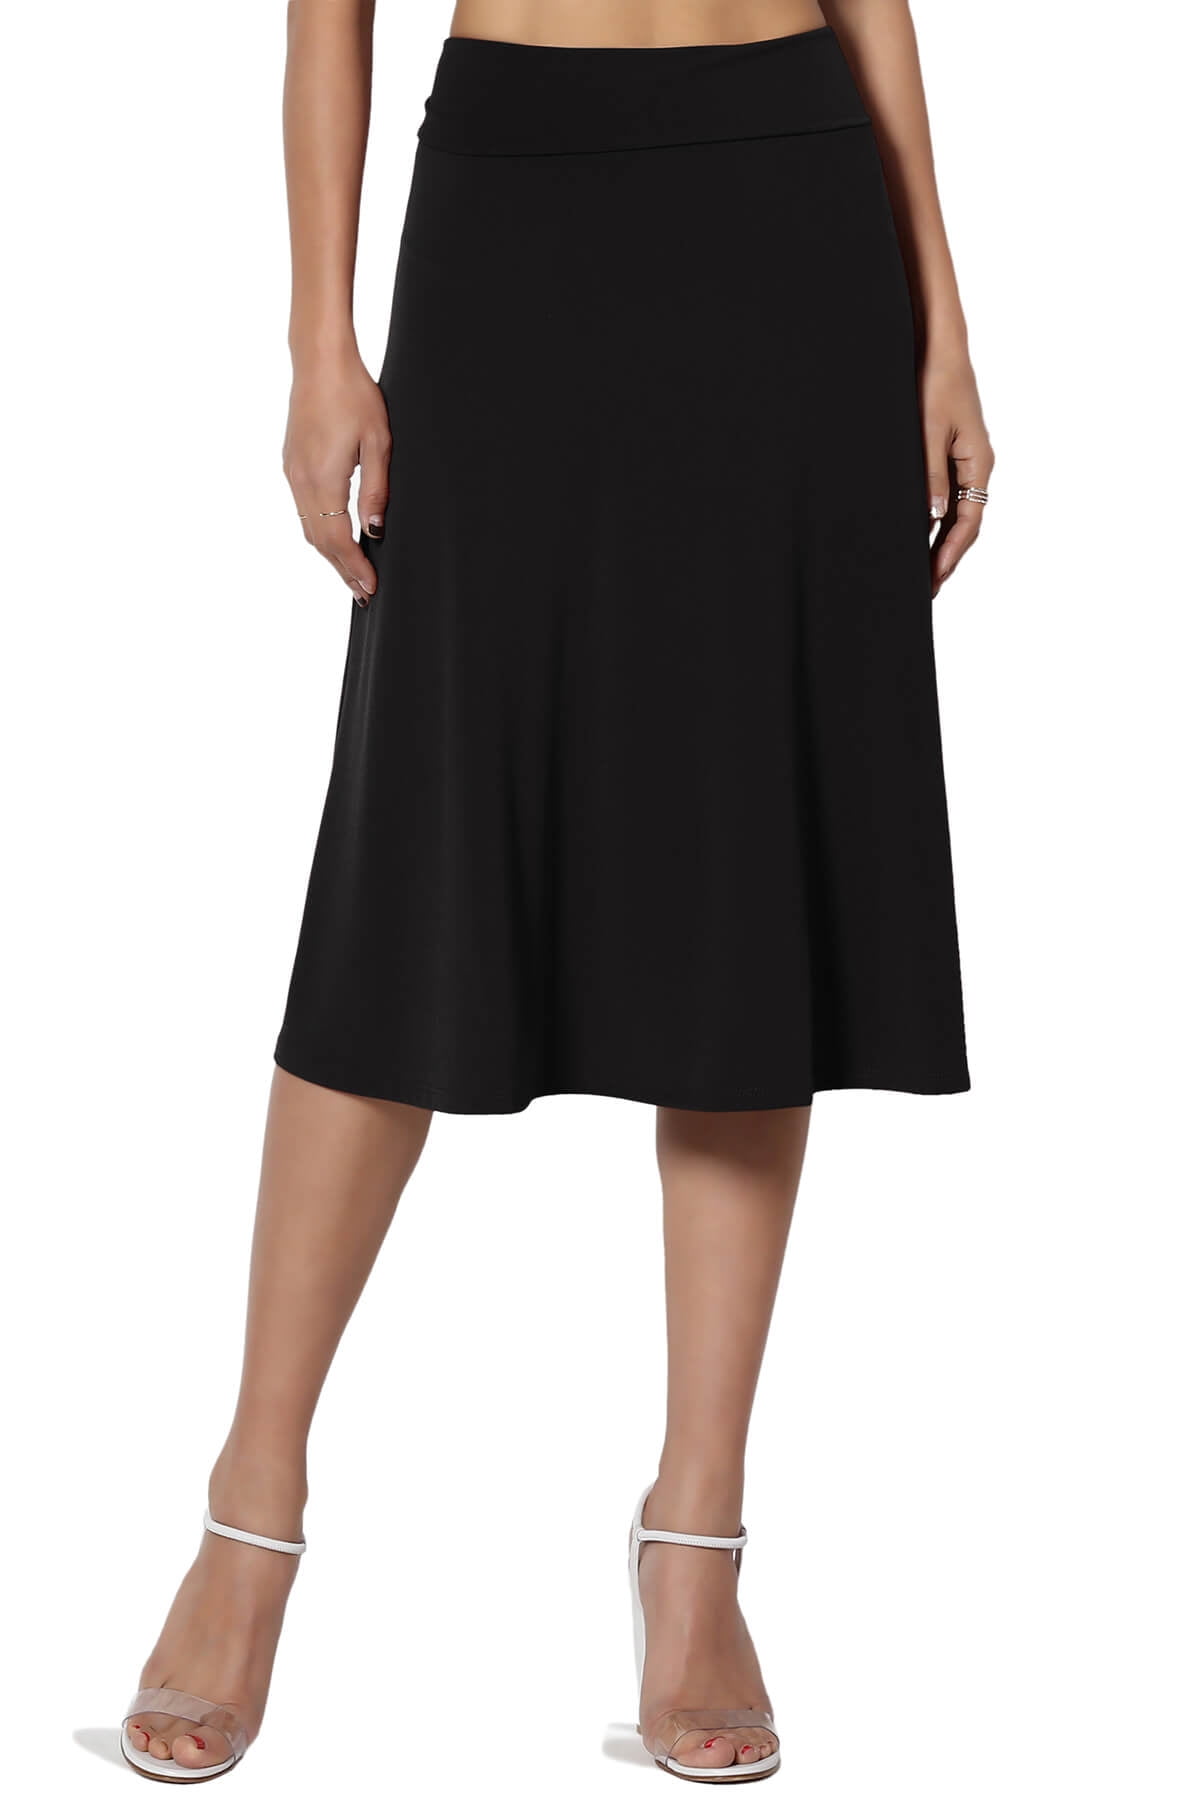 B6179  Misses Gored Skirts and Culottes  Butterick Patterns